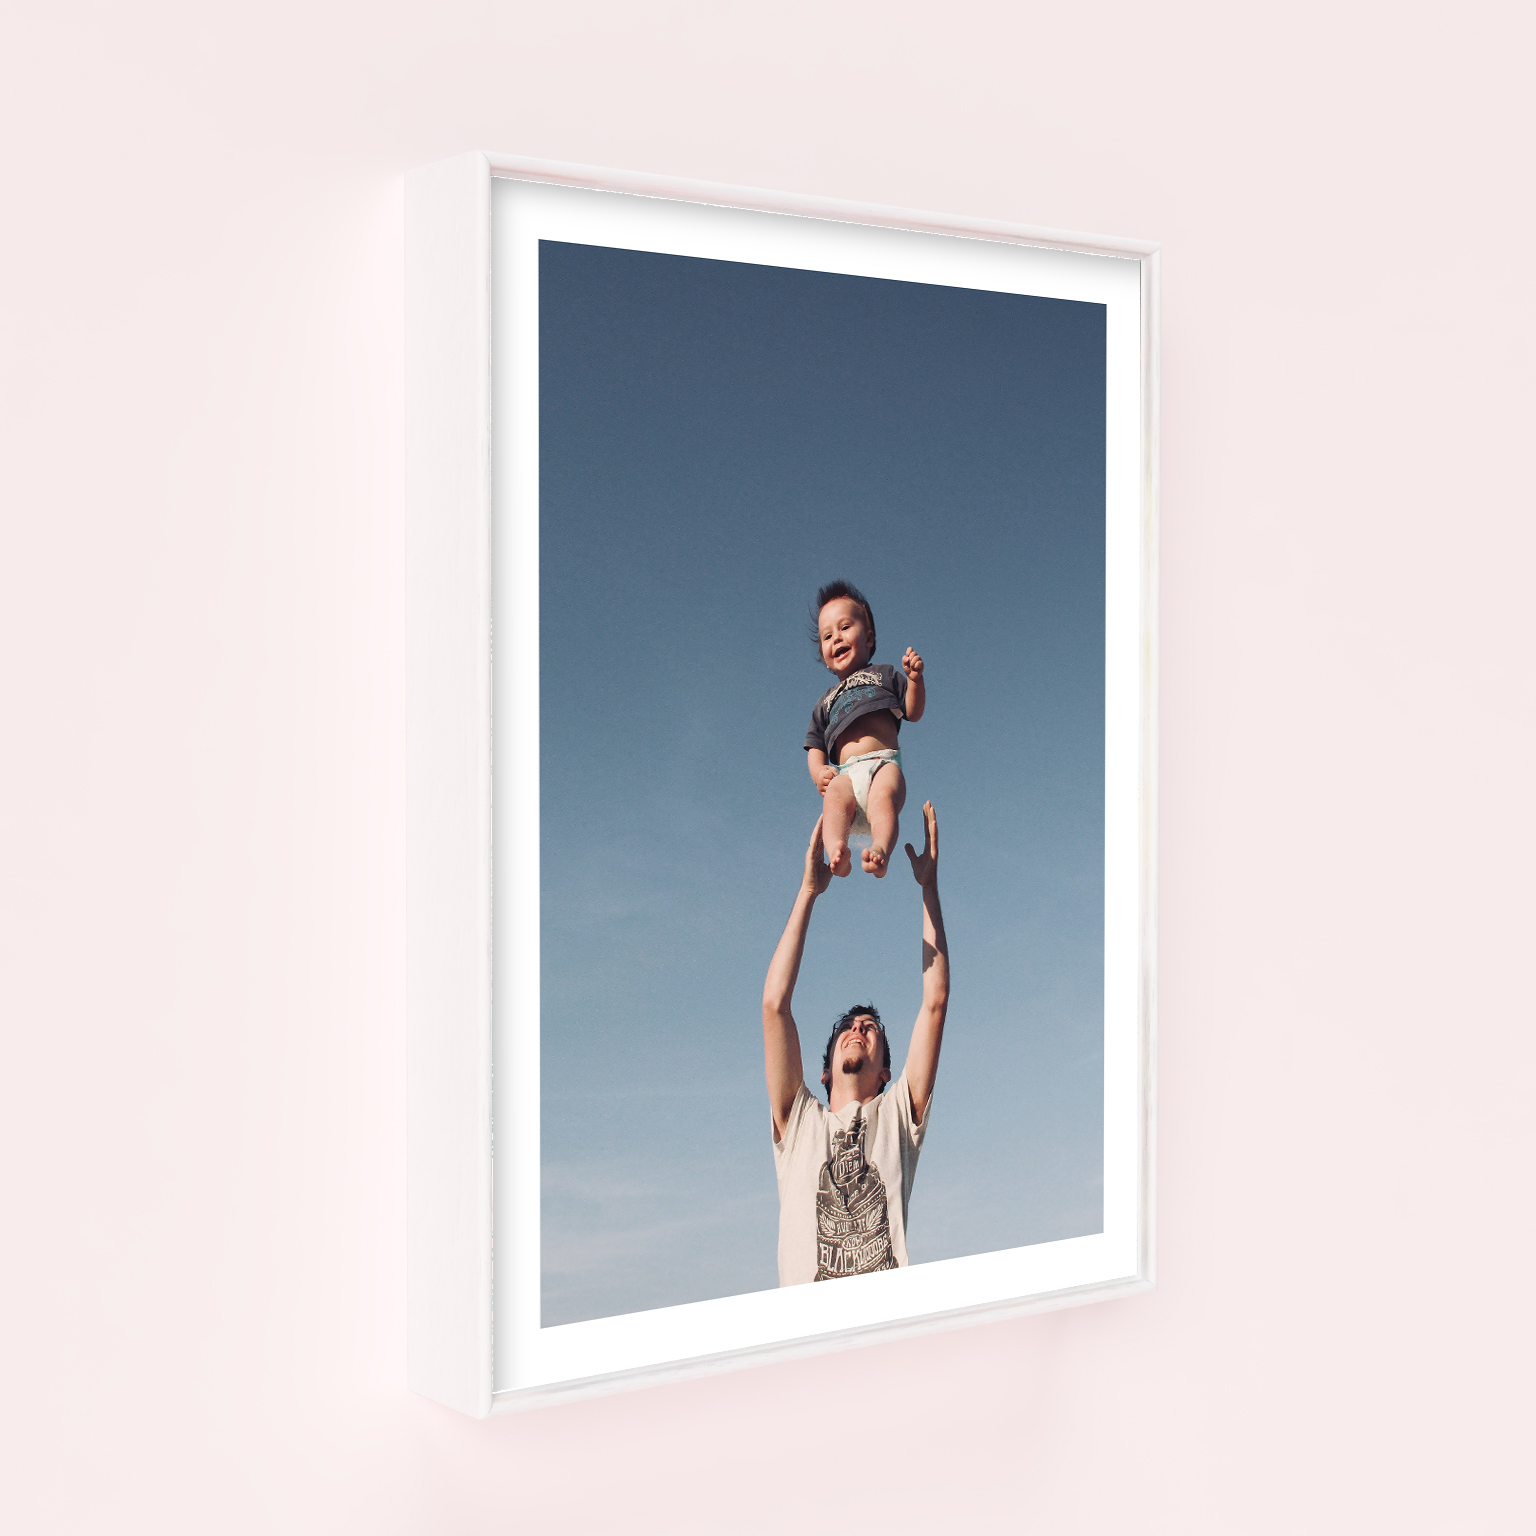 Personalized Deep Frame Photo Prints – Capture memories with our exquisite deep frame prints.